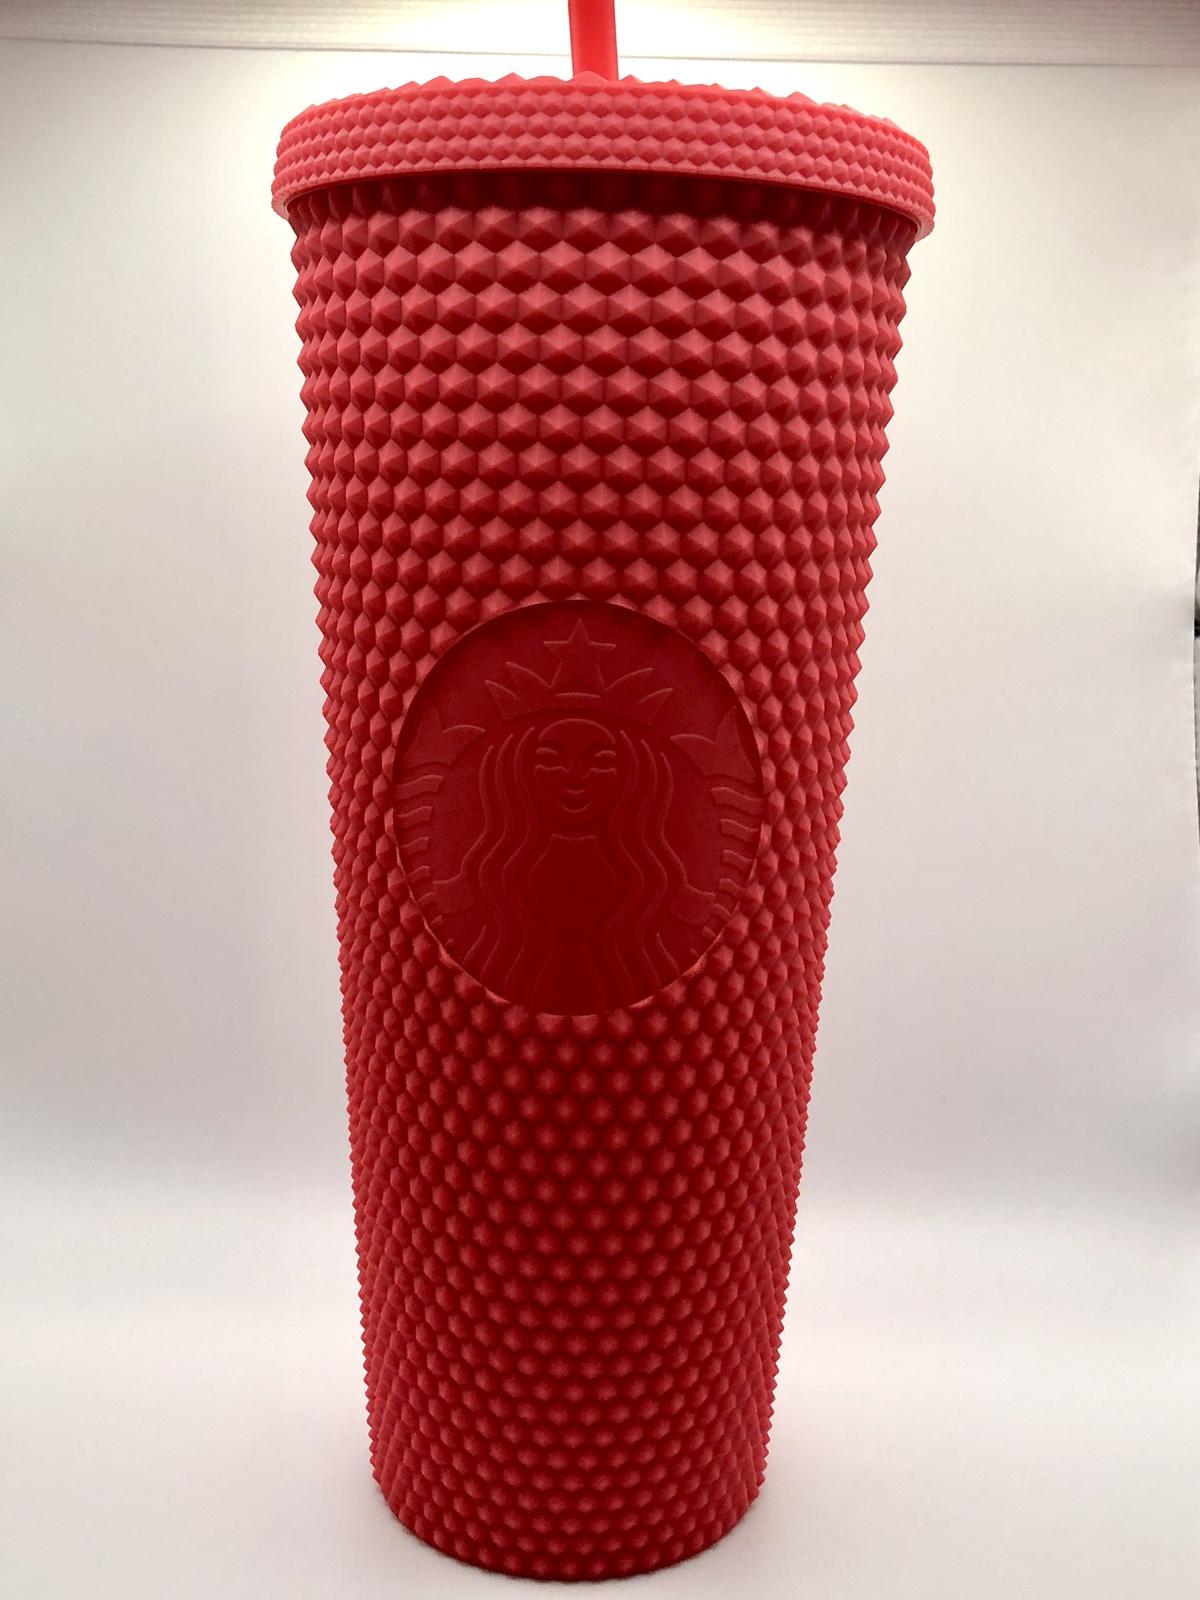 Primary image for Tumbler cold drink diamond radiate texture durian studded with lid and straw